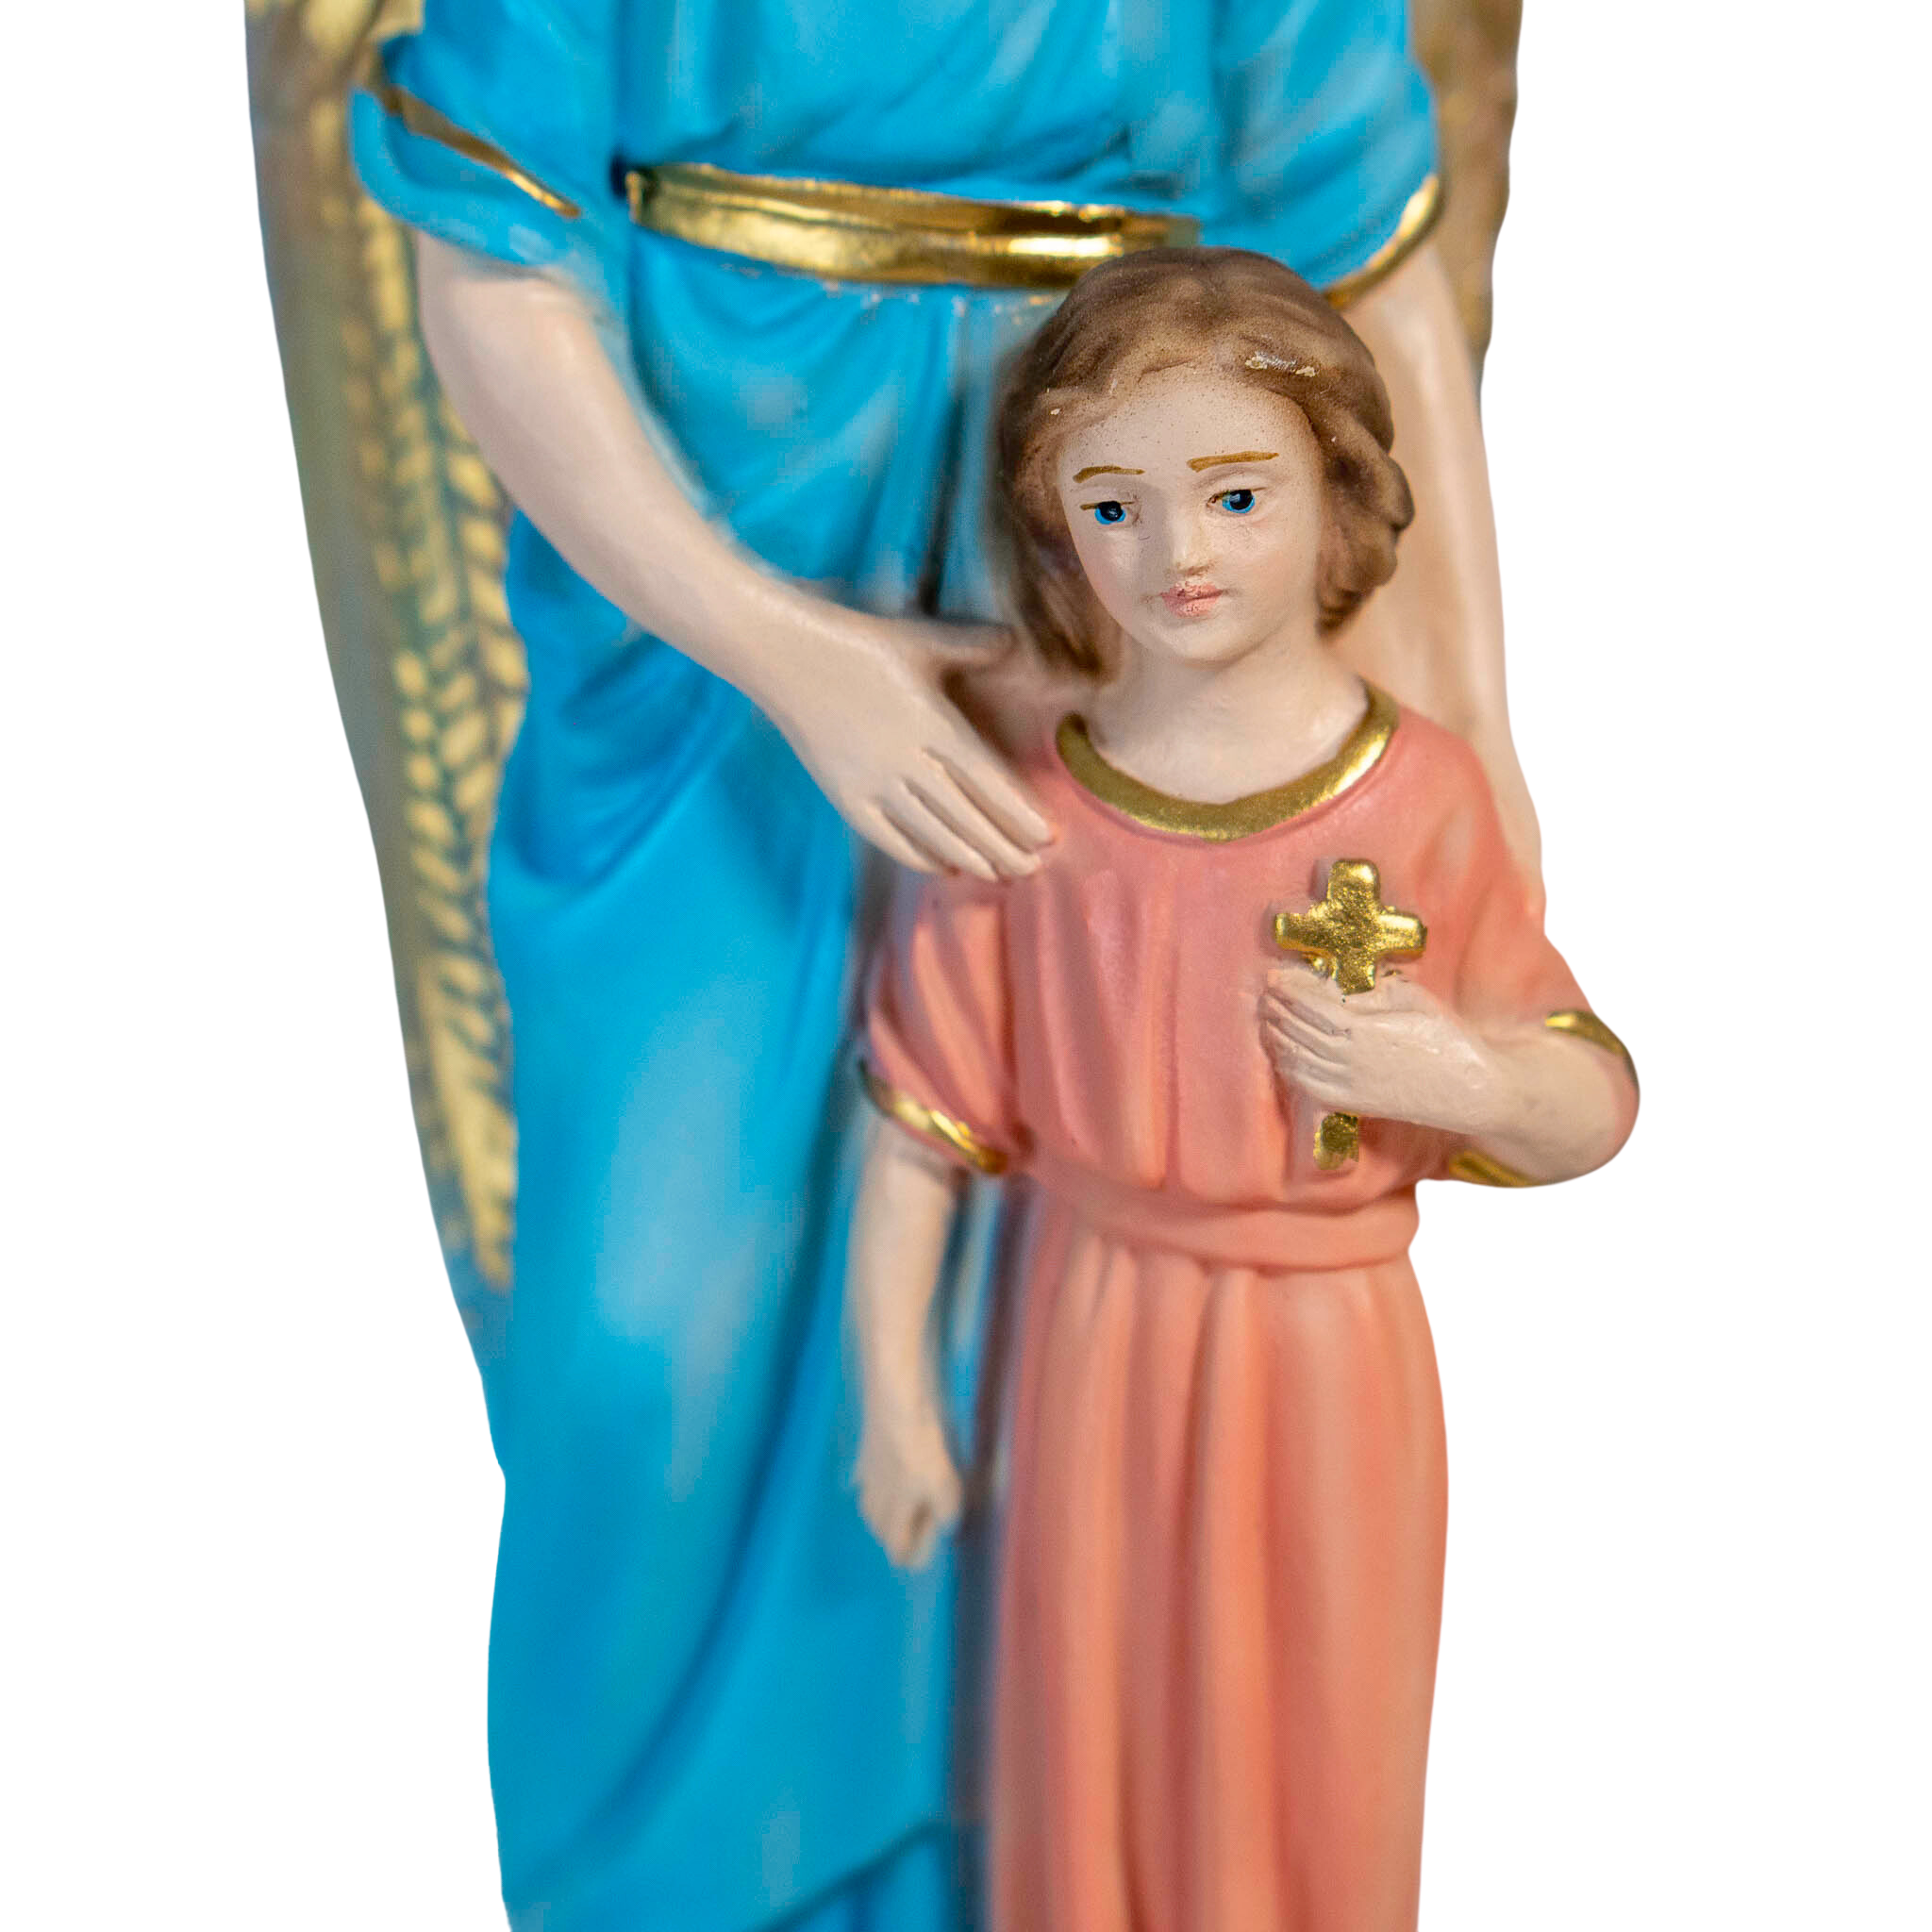 The Faith Gift Shop Guardian Angels  statue - Hand Painted in Italy - Our Tuscany Collection - Estatua del Angel de La Guarda